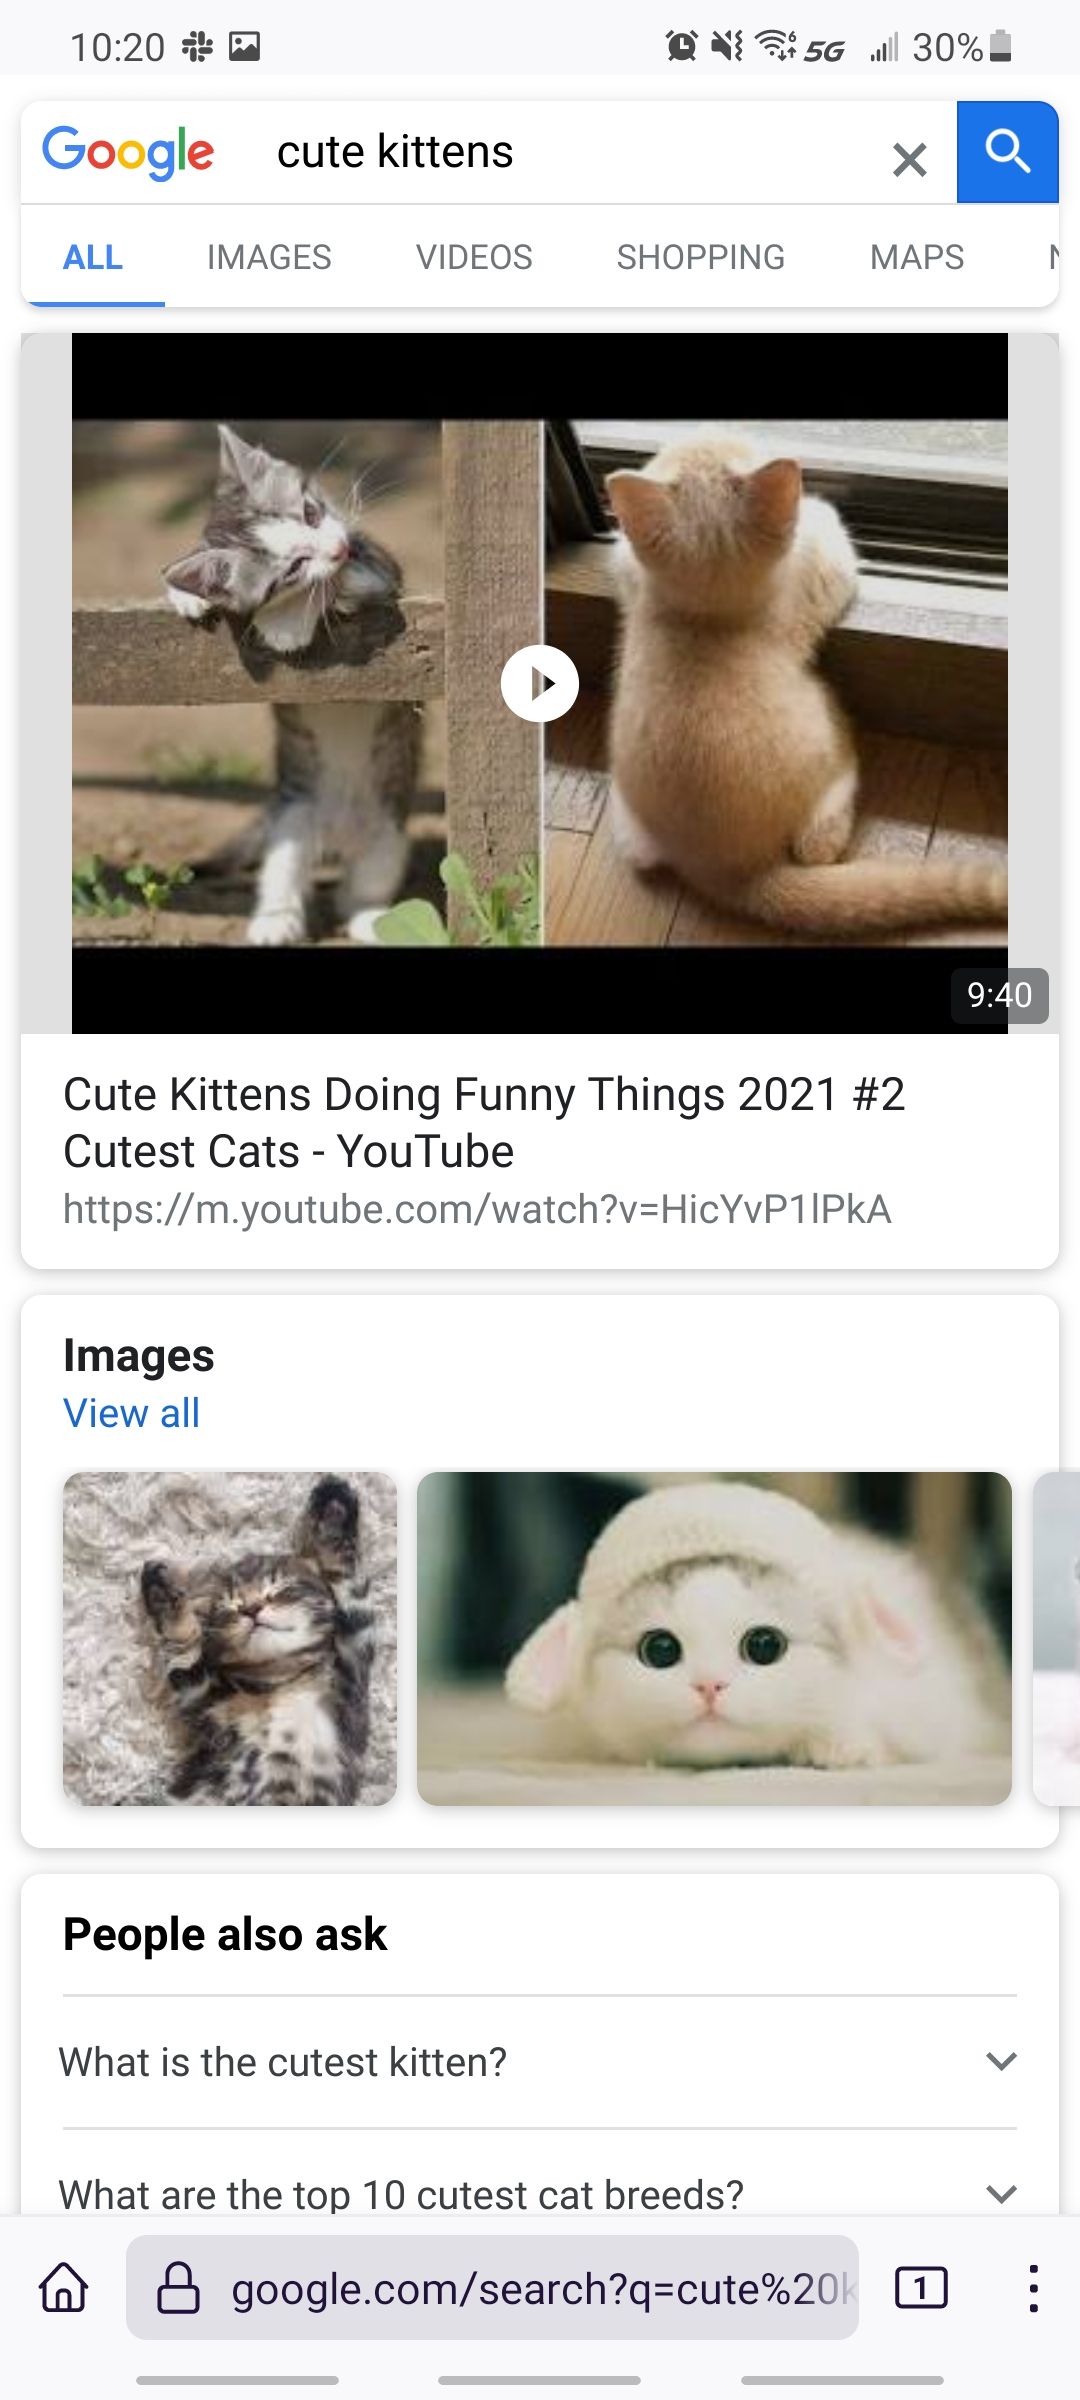 firefox browser using google search engine to look for cute kittens